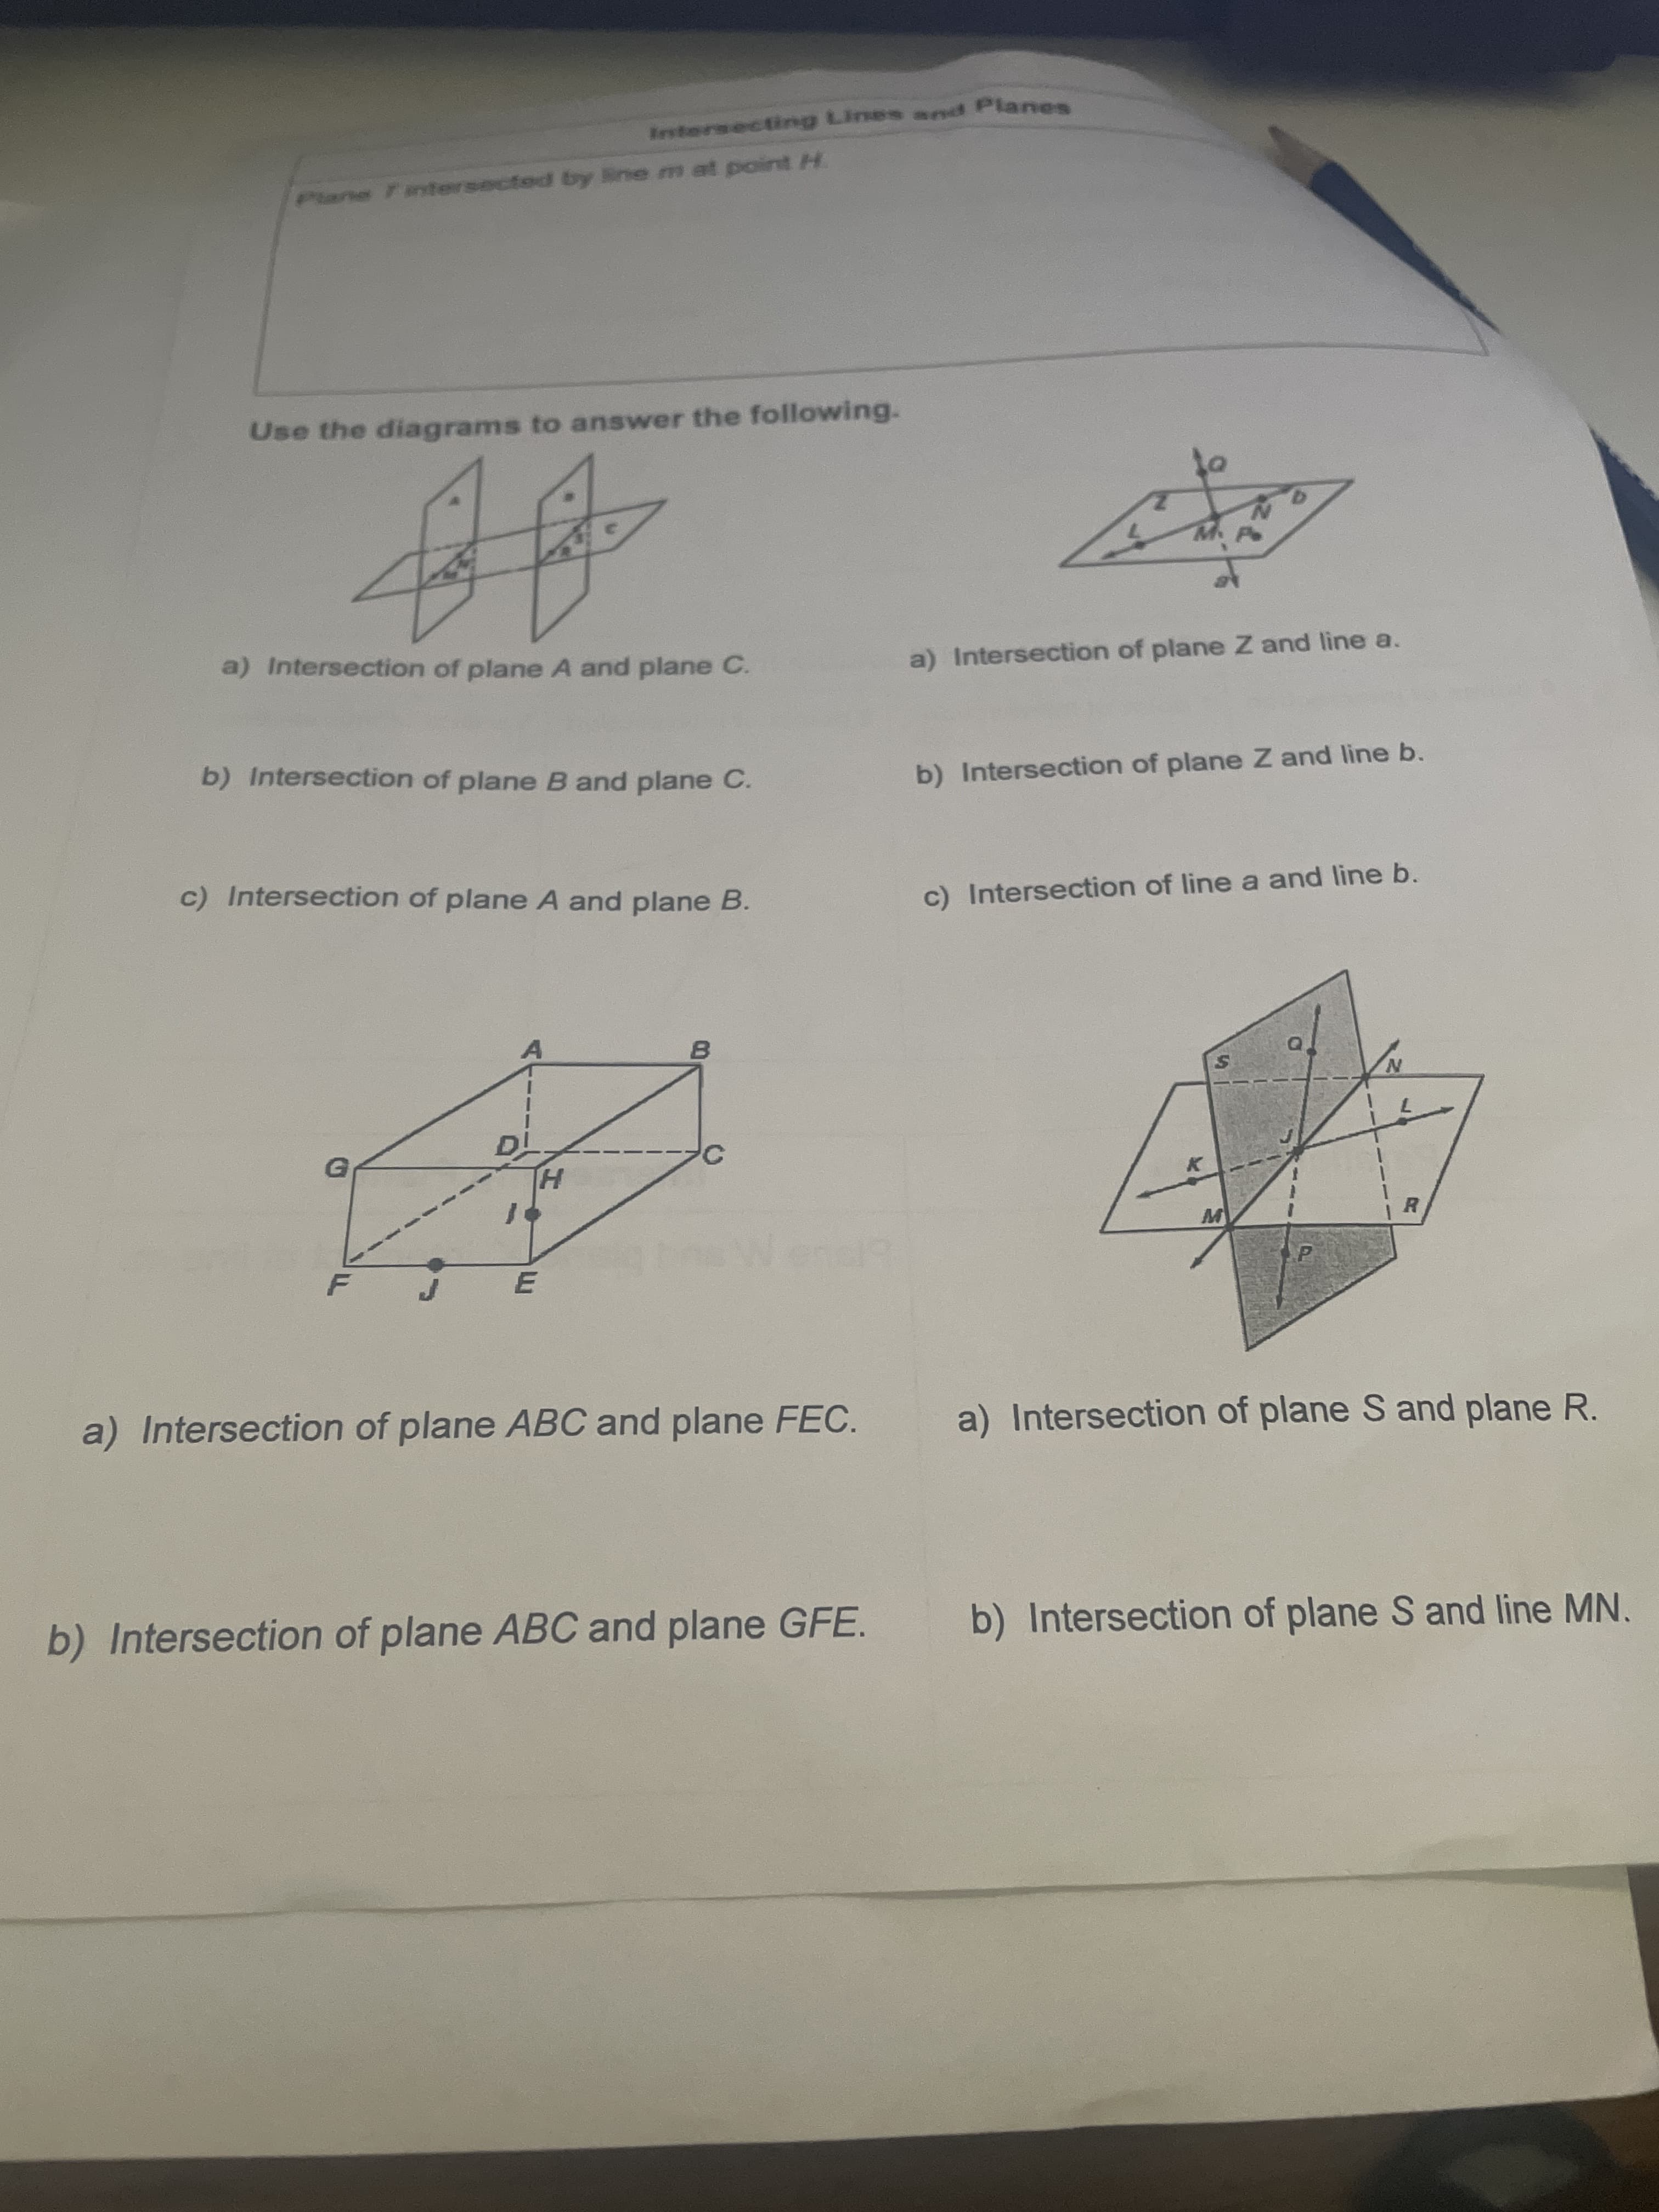 Use the diagrams to answer the following.
a) Intersection of plane A and plane C.
a)
b) Intersection of plane B and plane C.
b)
c) Intersection of plane A and plane B.
C
